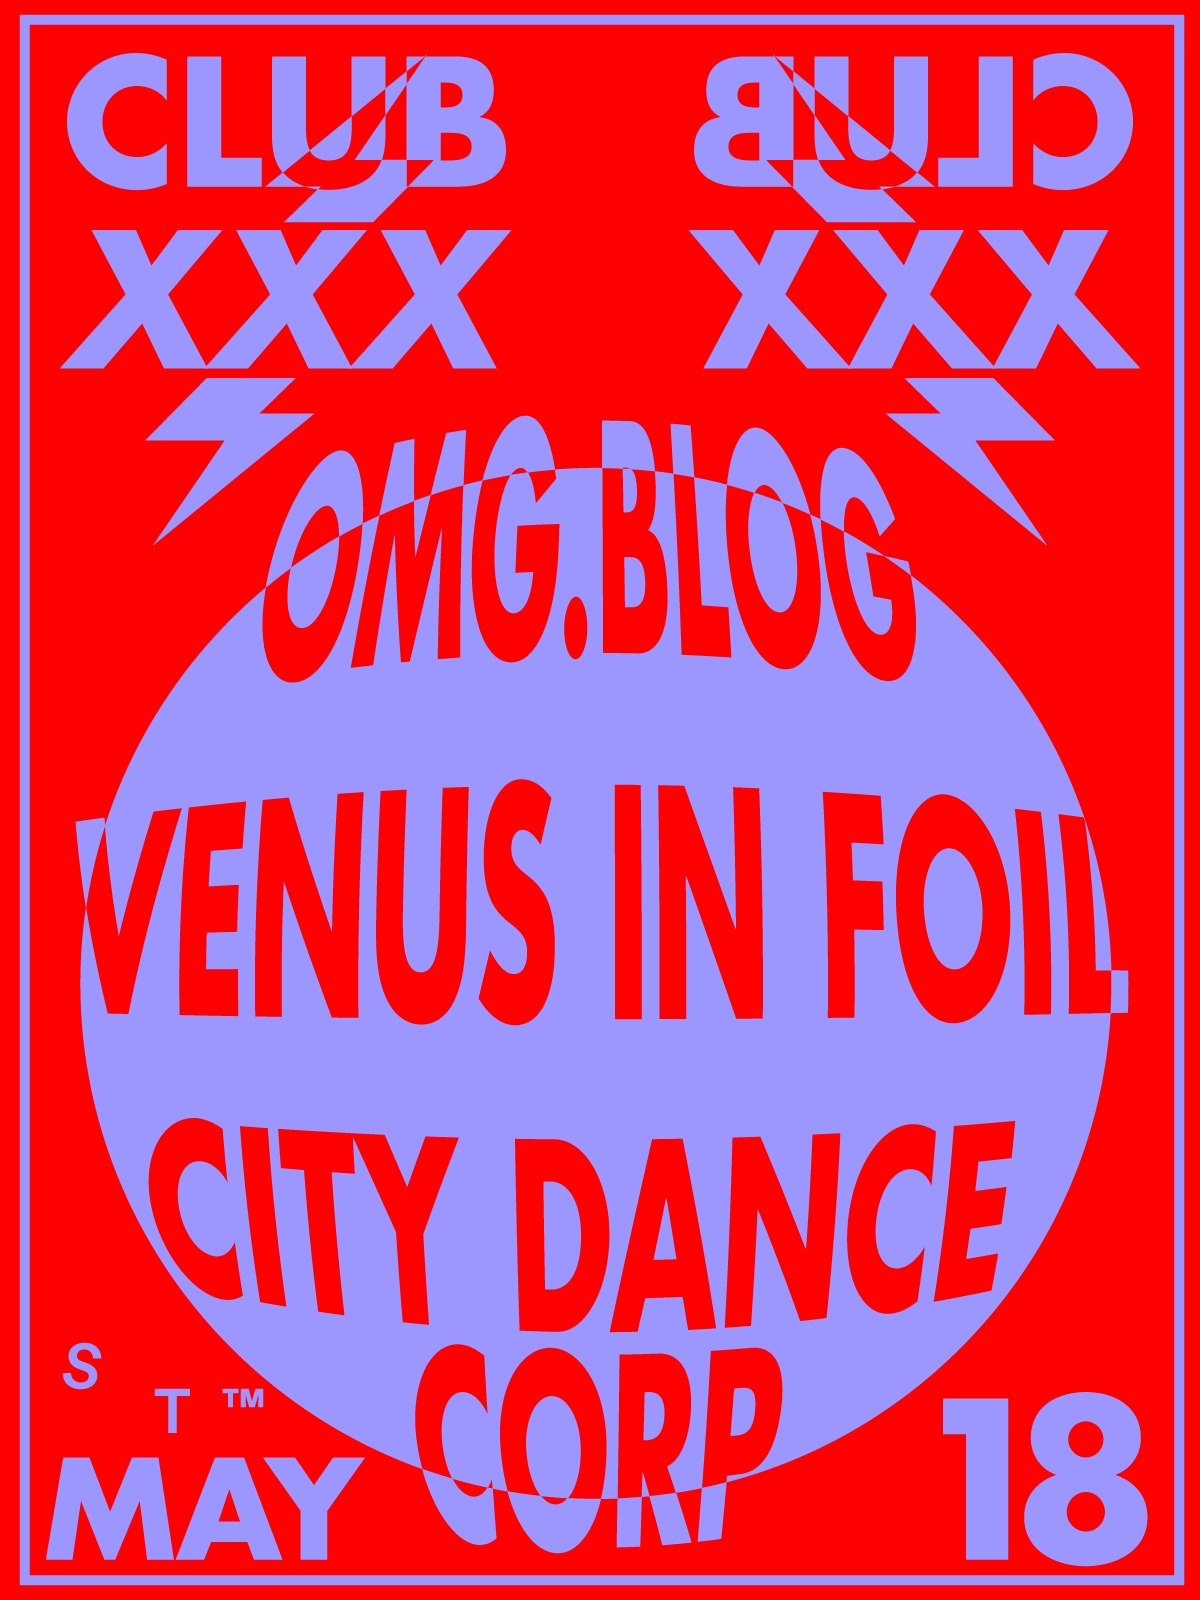 125: Club XXX featuring OMG.BLOG, Venus in Foil and City Dance Corporation  - フライヤー表